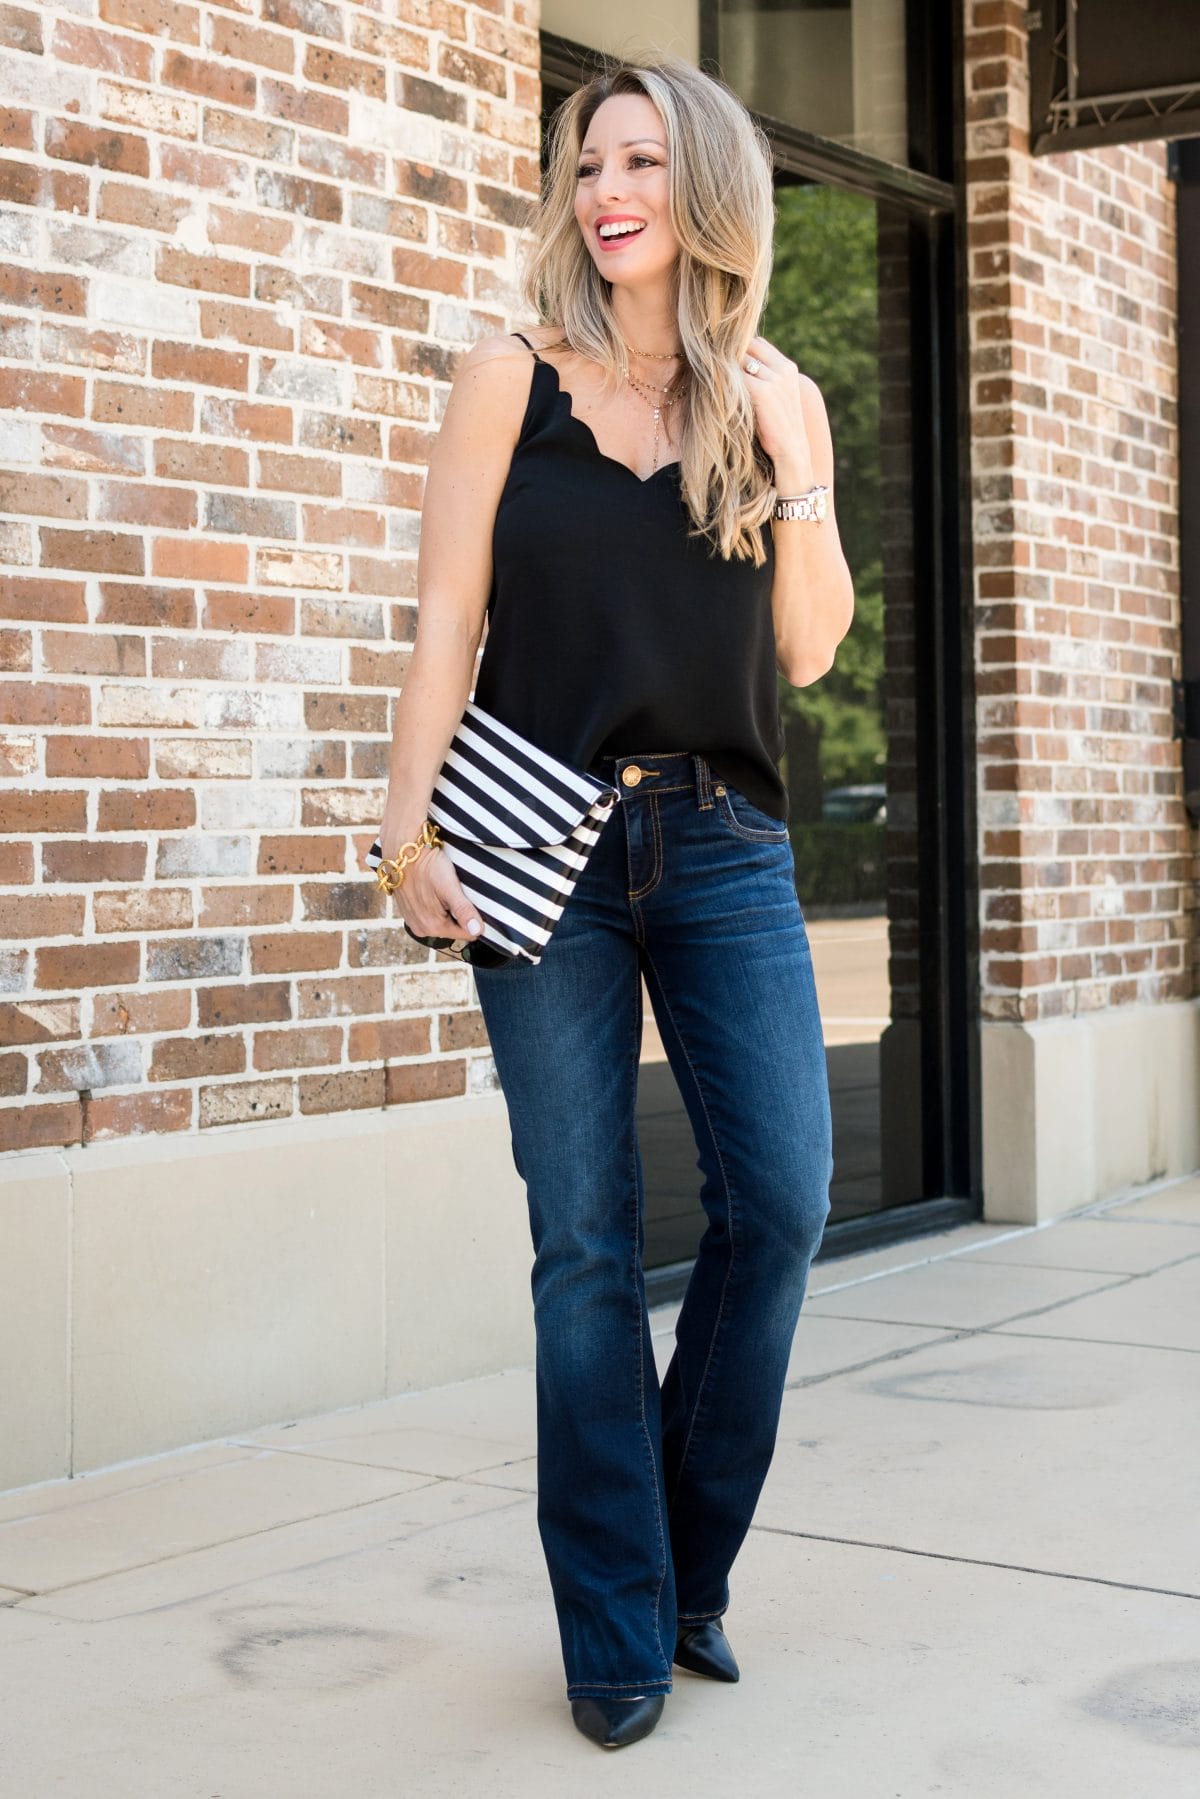 Black scallop camisole bootcut jeans